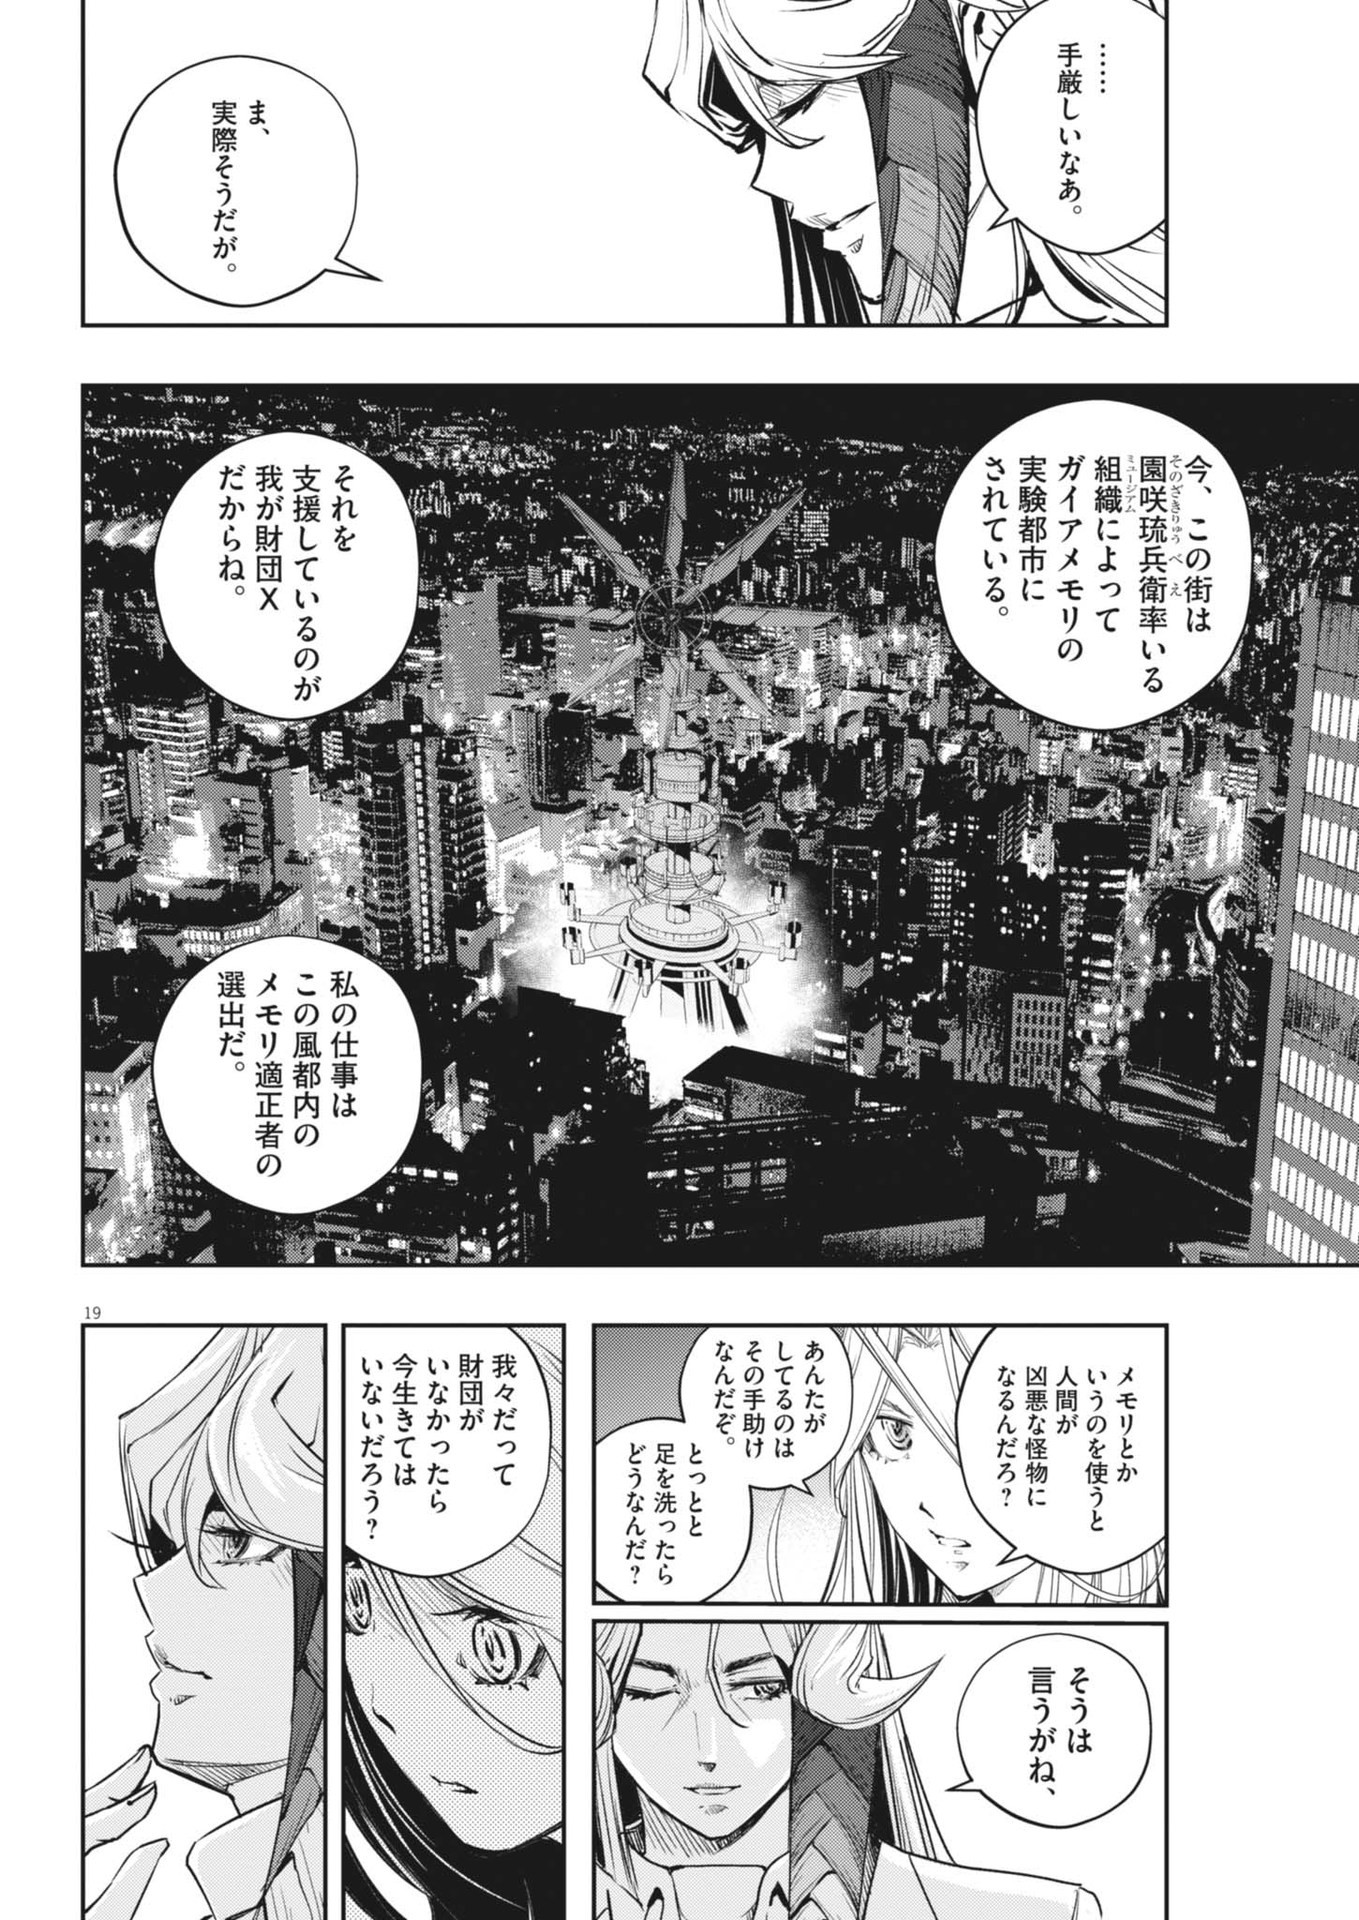 Kamen Rider W: Fuuto Tantei - Chapter 144 - Page 19